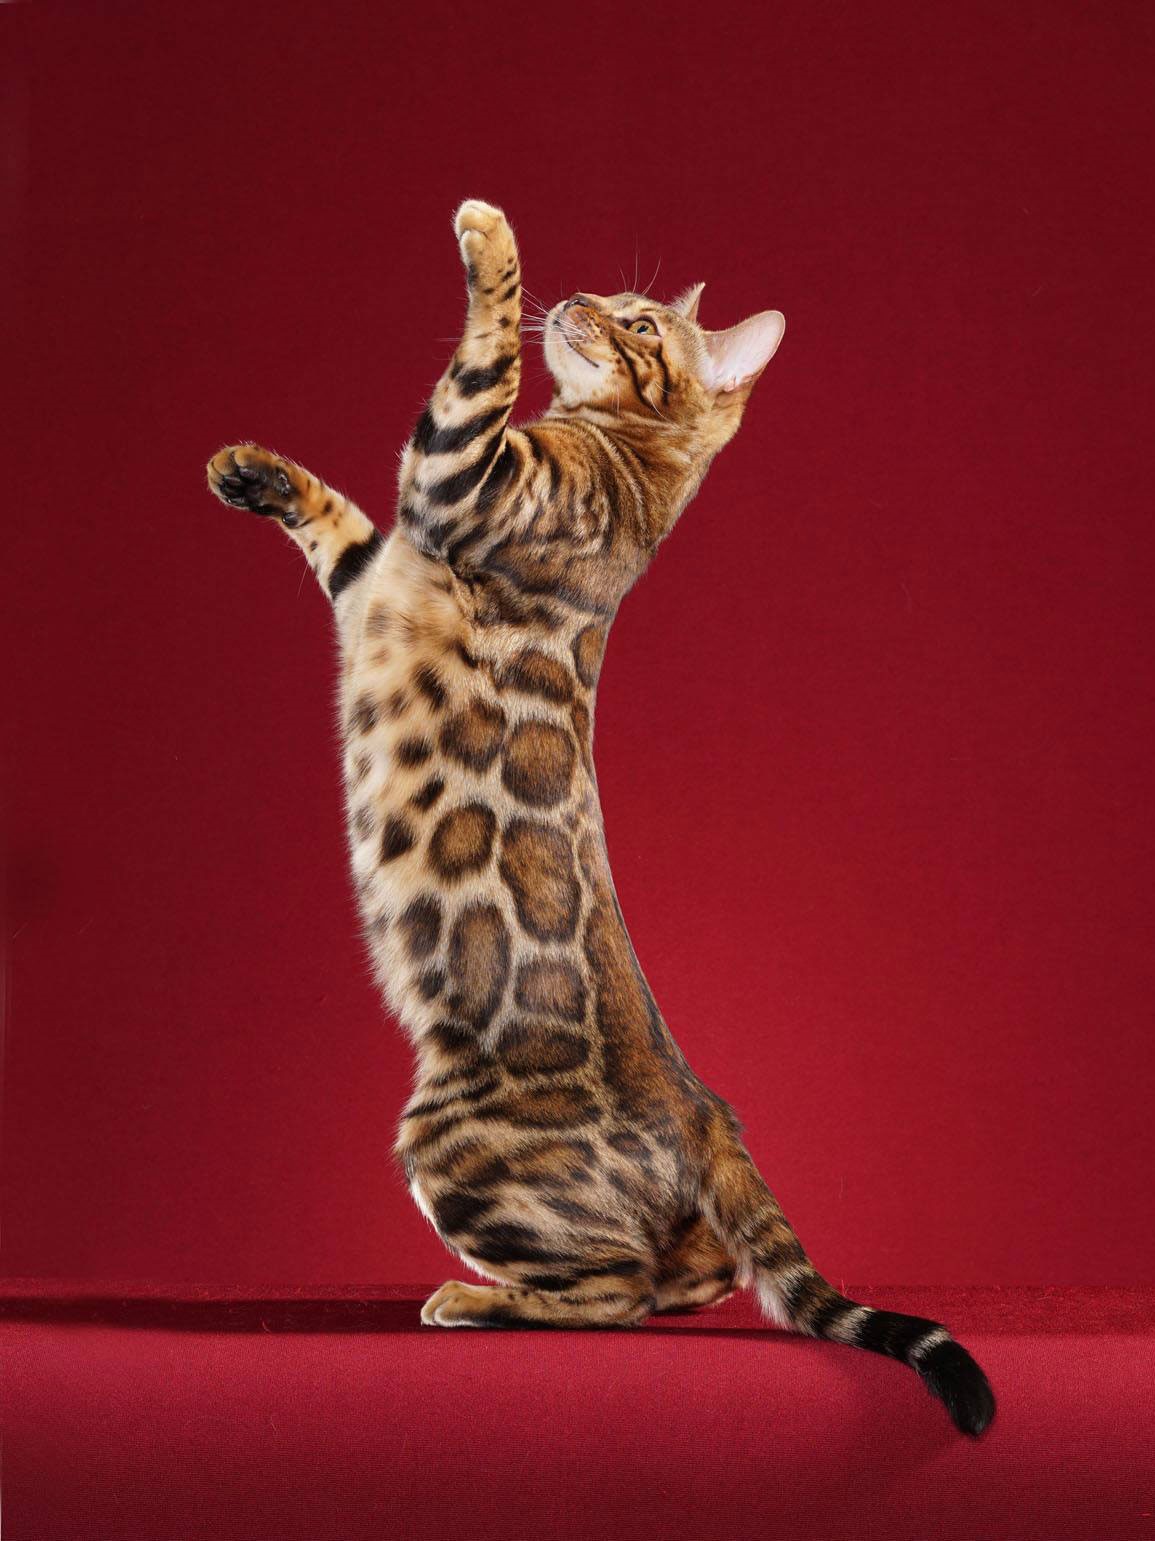 A gorgeous Bengal cat with a shiny coat standing on its back feet